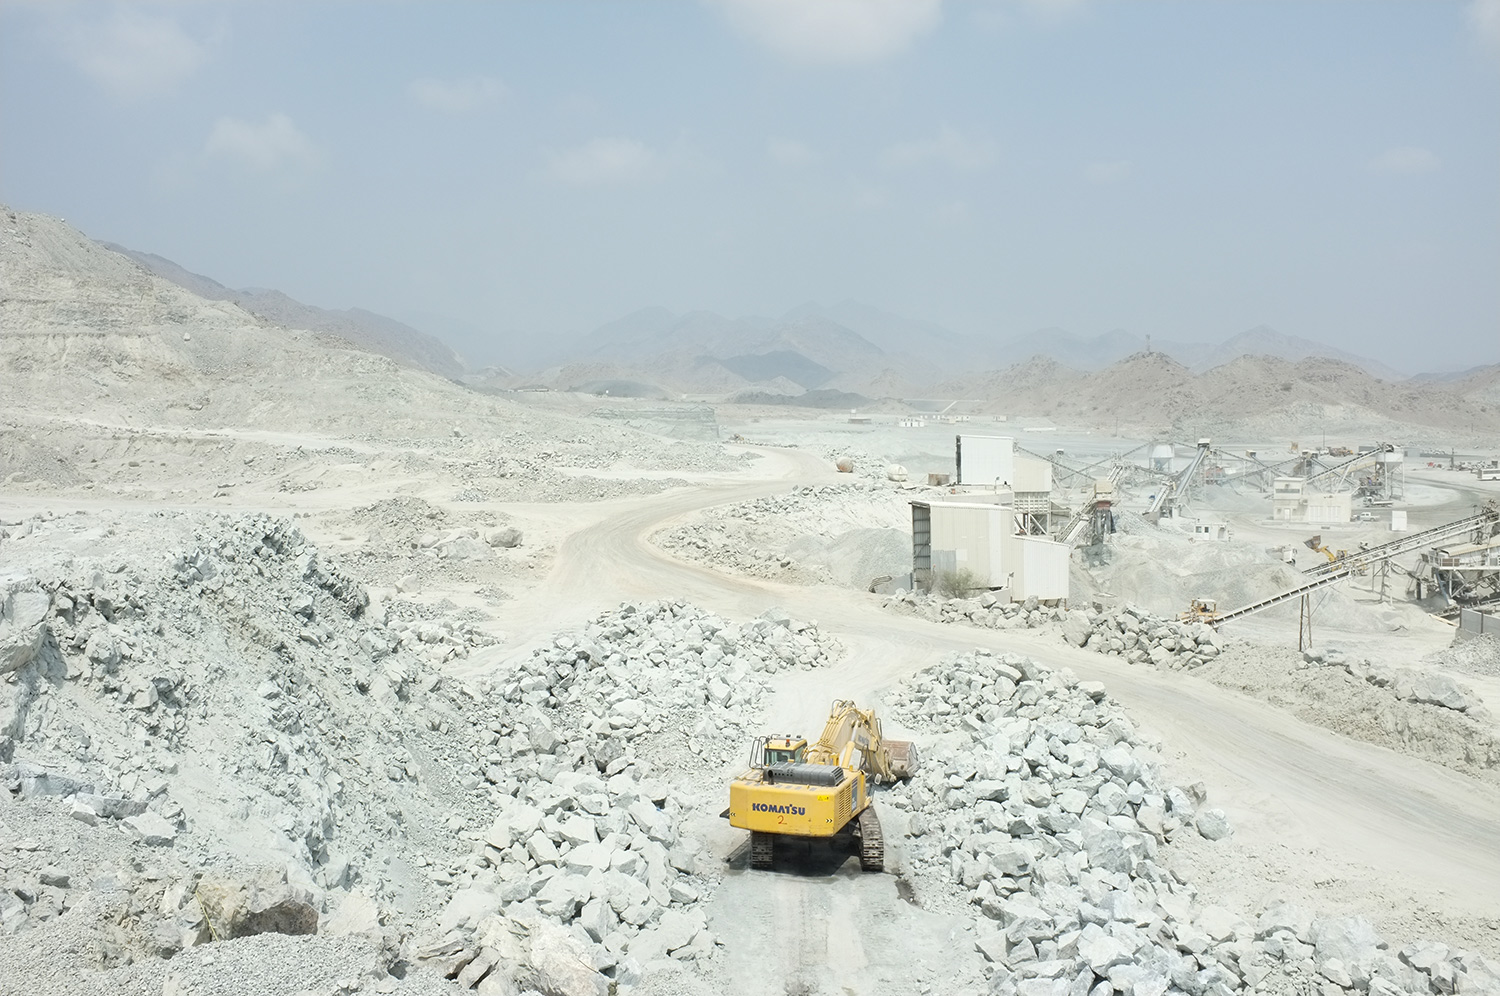  Excavator clearing site after explosion, Quarry, Fujairah  Research image 